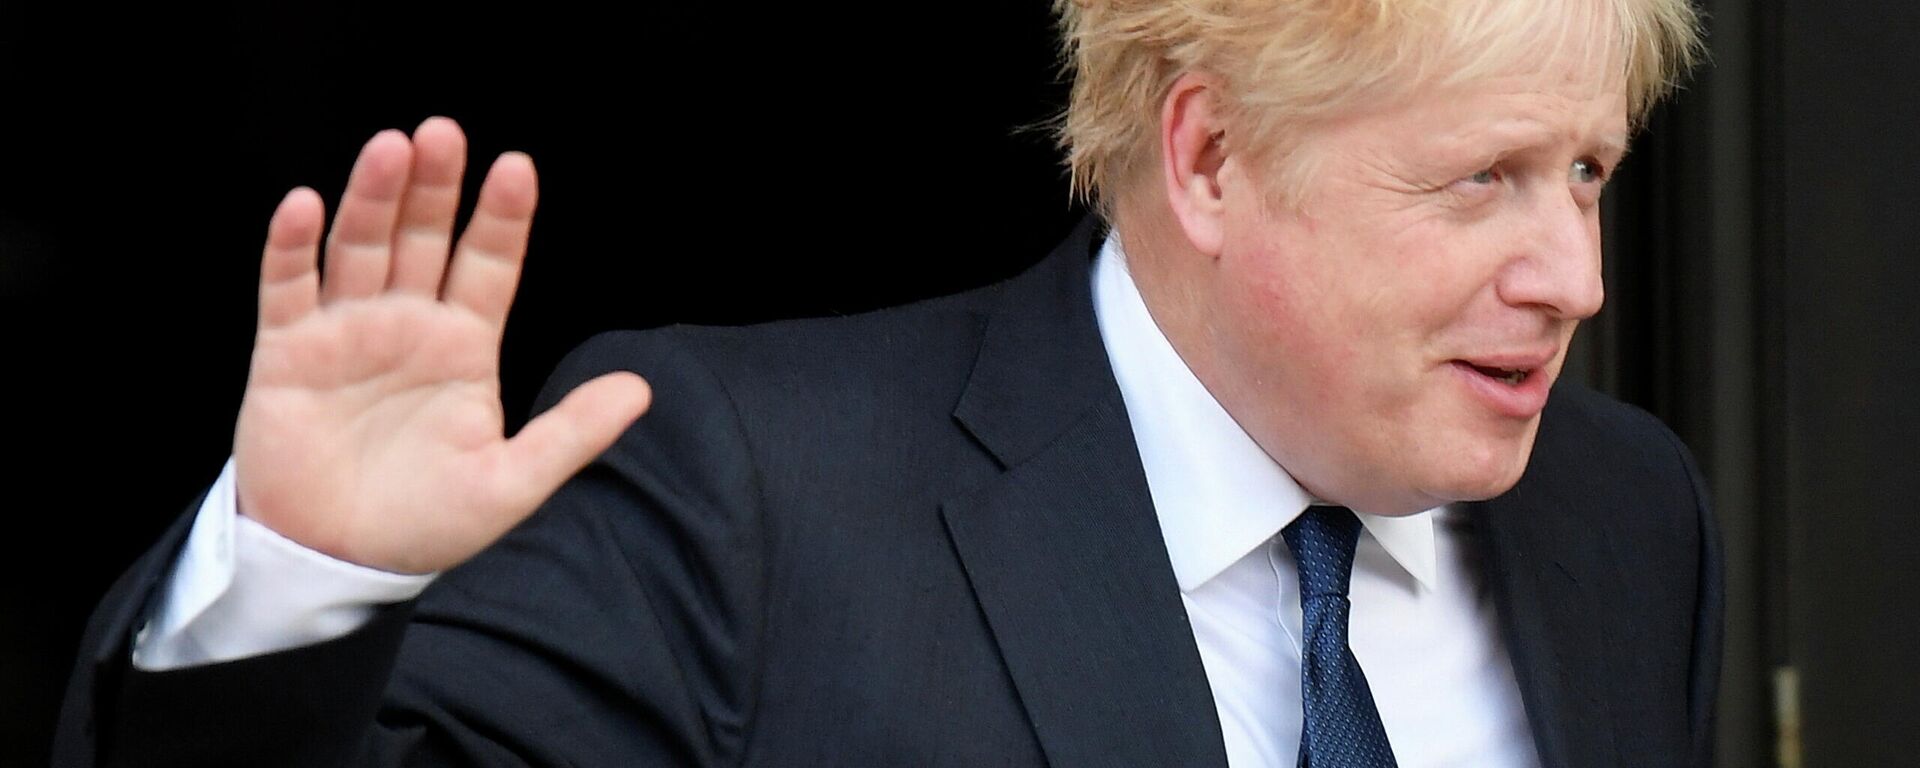 Britain's Prime Minister Boris Johnson gestures as he walks out of his hotel during the annual Conservative Party conference, in Manchester, Britain, October 3, 2021 - Sputnik International, 1920, 03.10.2021